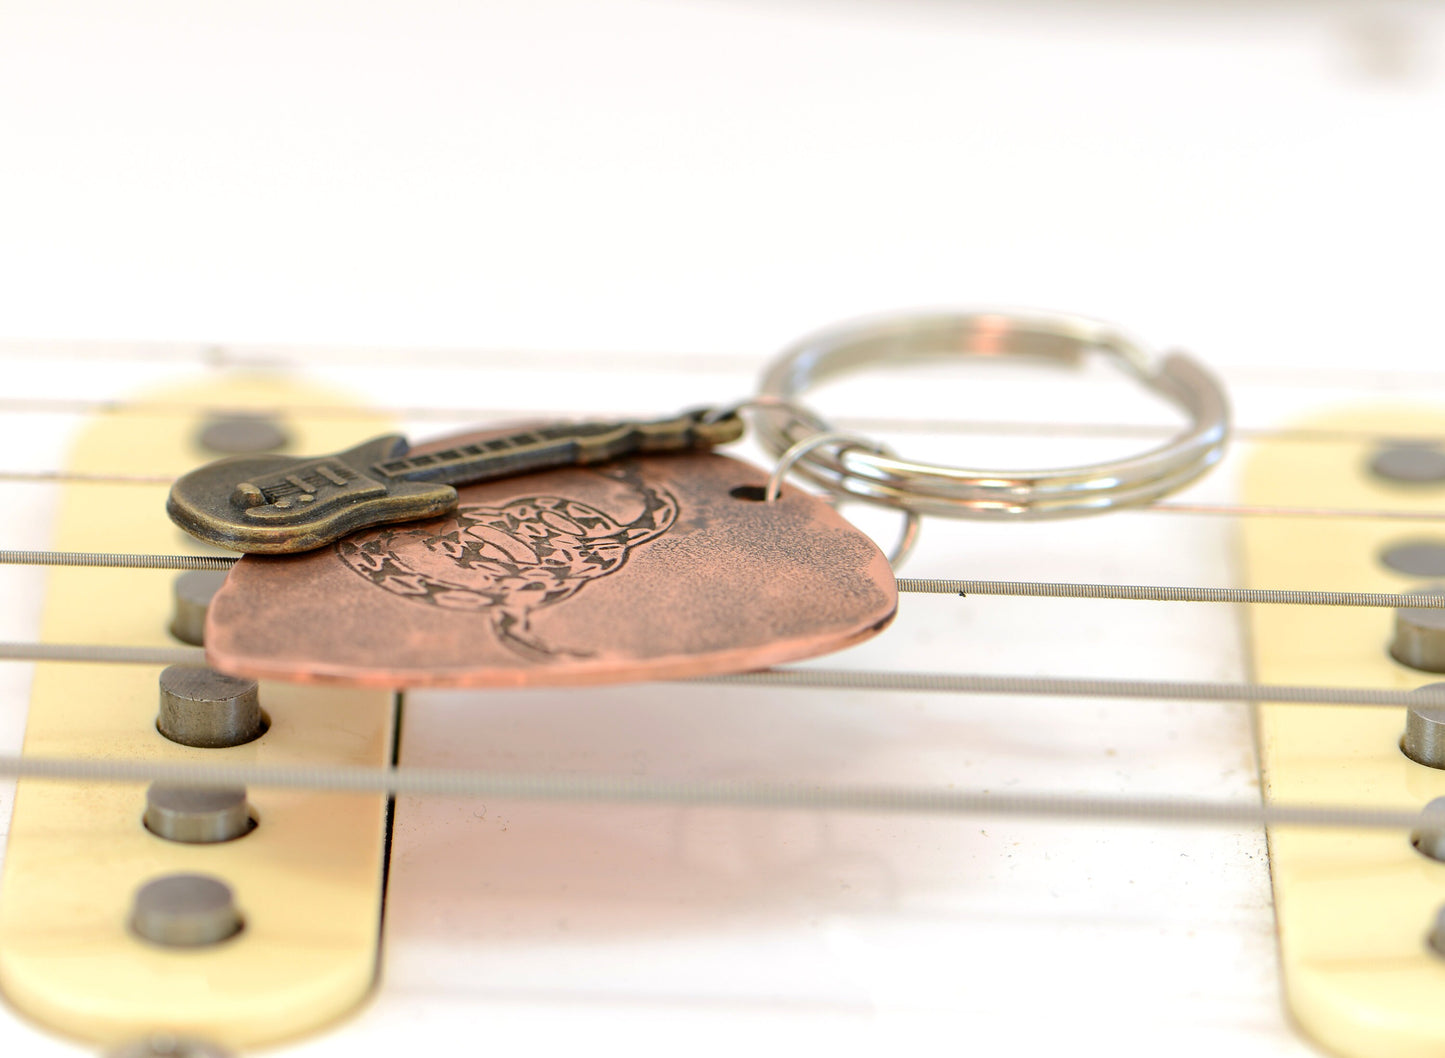 Snake on Copper Guitar Pick Keychain with Brass Guitar Charm